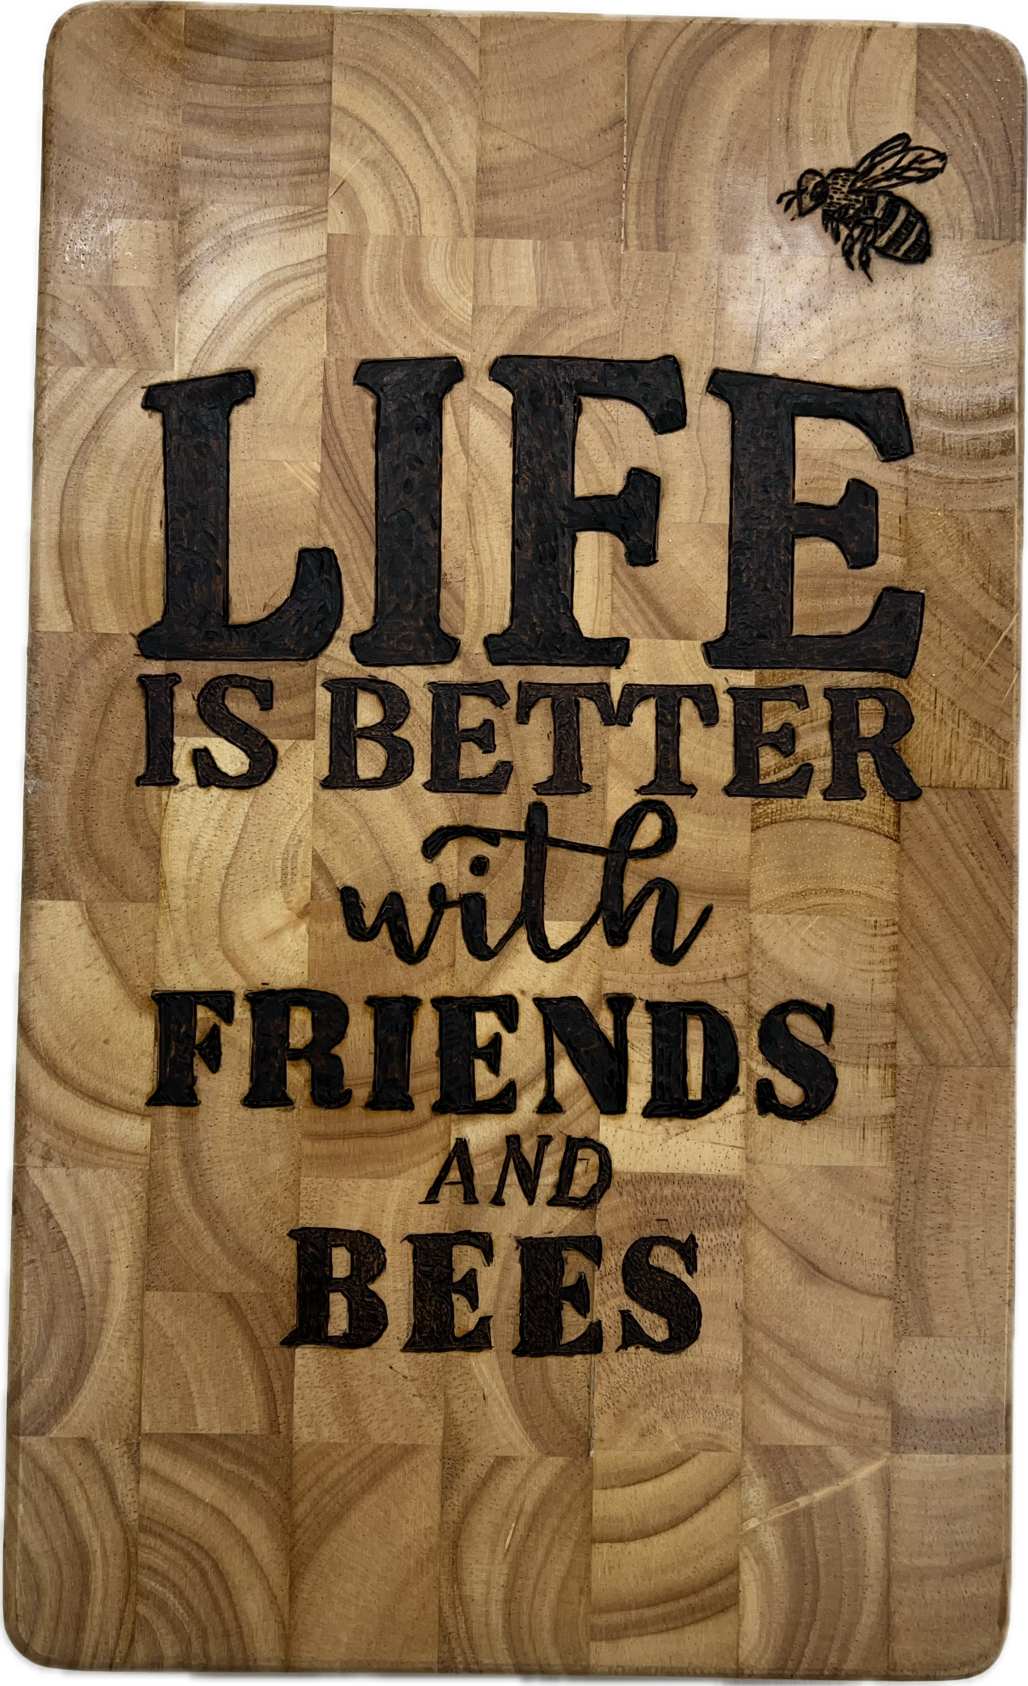 "Life is Better with Friends and Bees" Butcher Block